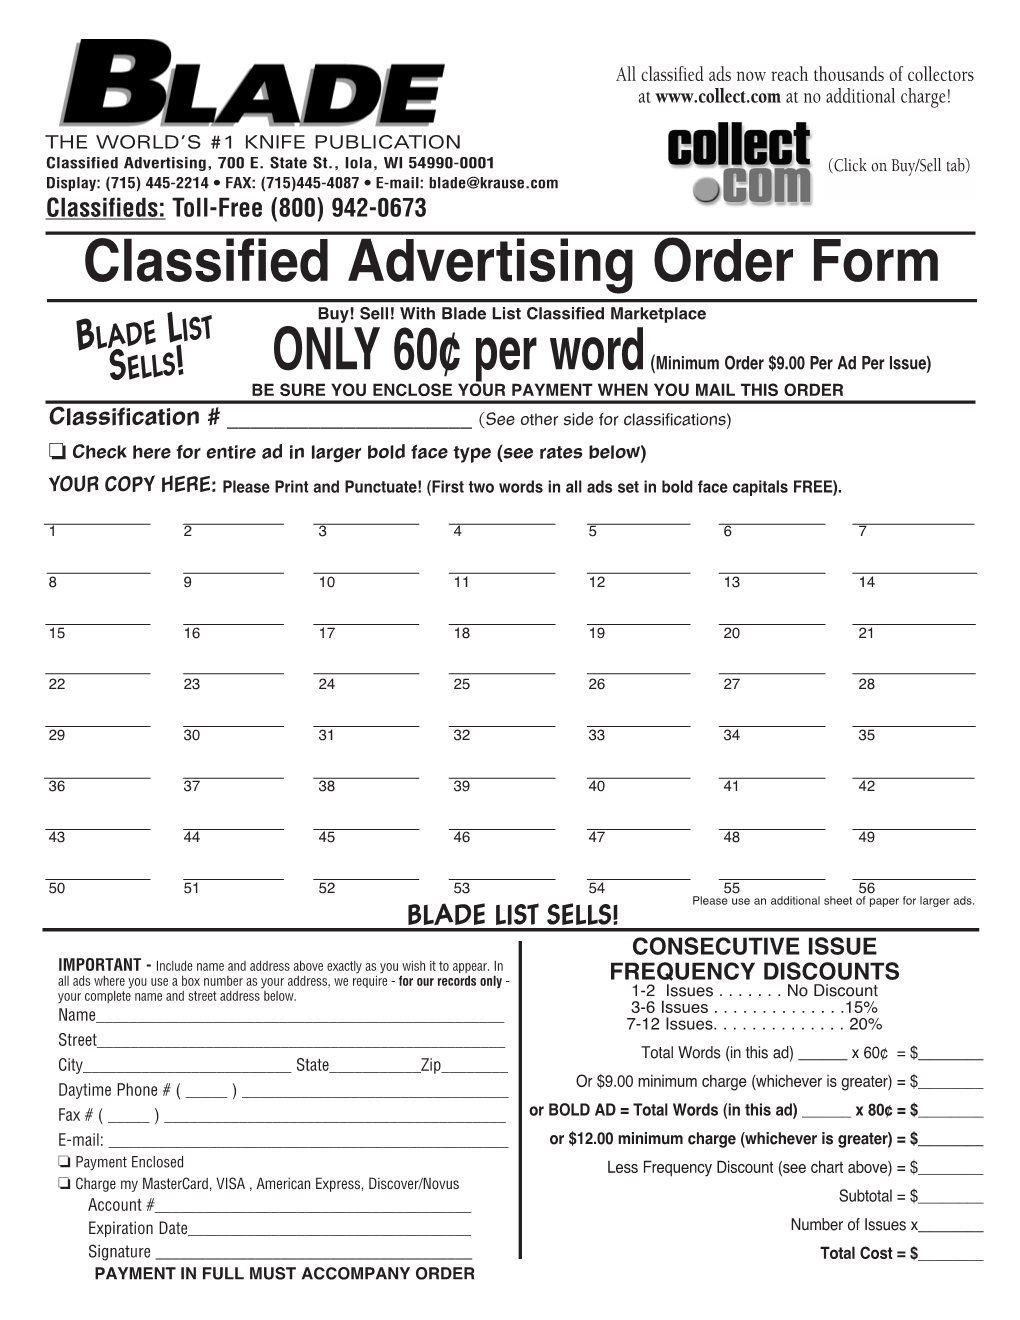 Classified Advertising Order Form